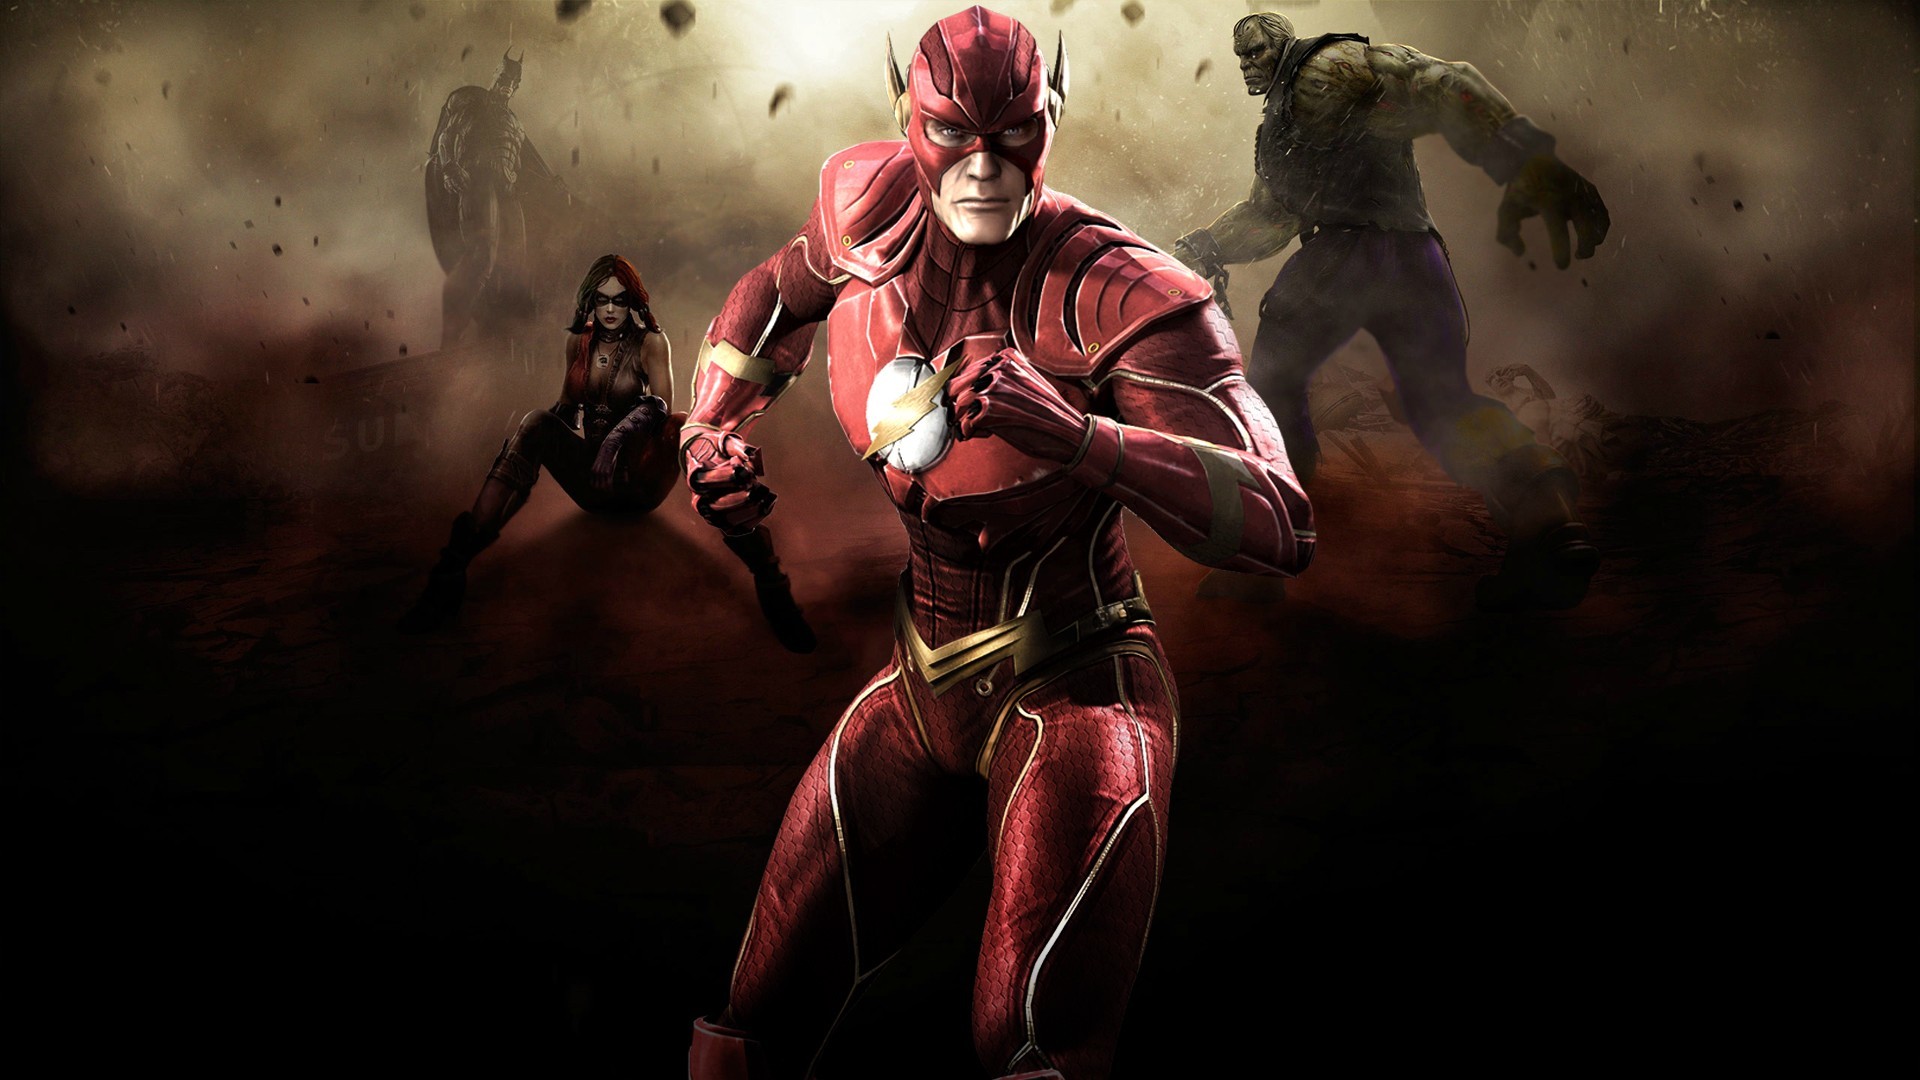 1920x1080 Injustice: Gods Among Us HD Wallpaper | Background Image |  |  ID:384807 - Wallpaper Abyss